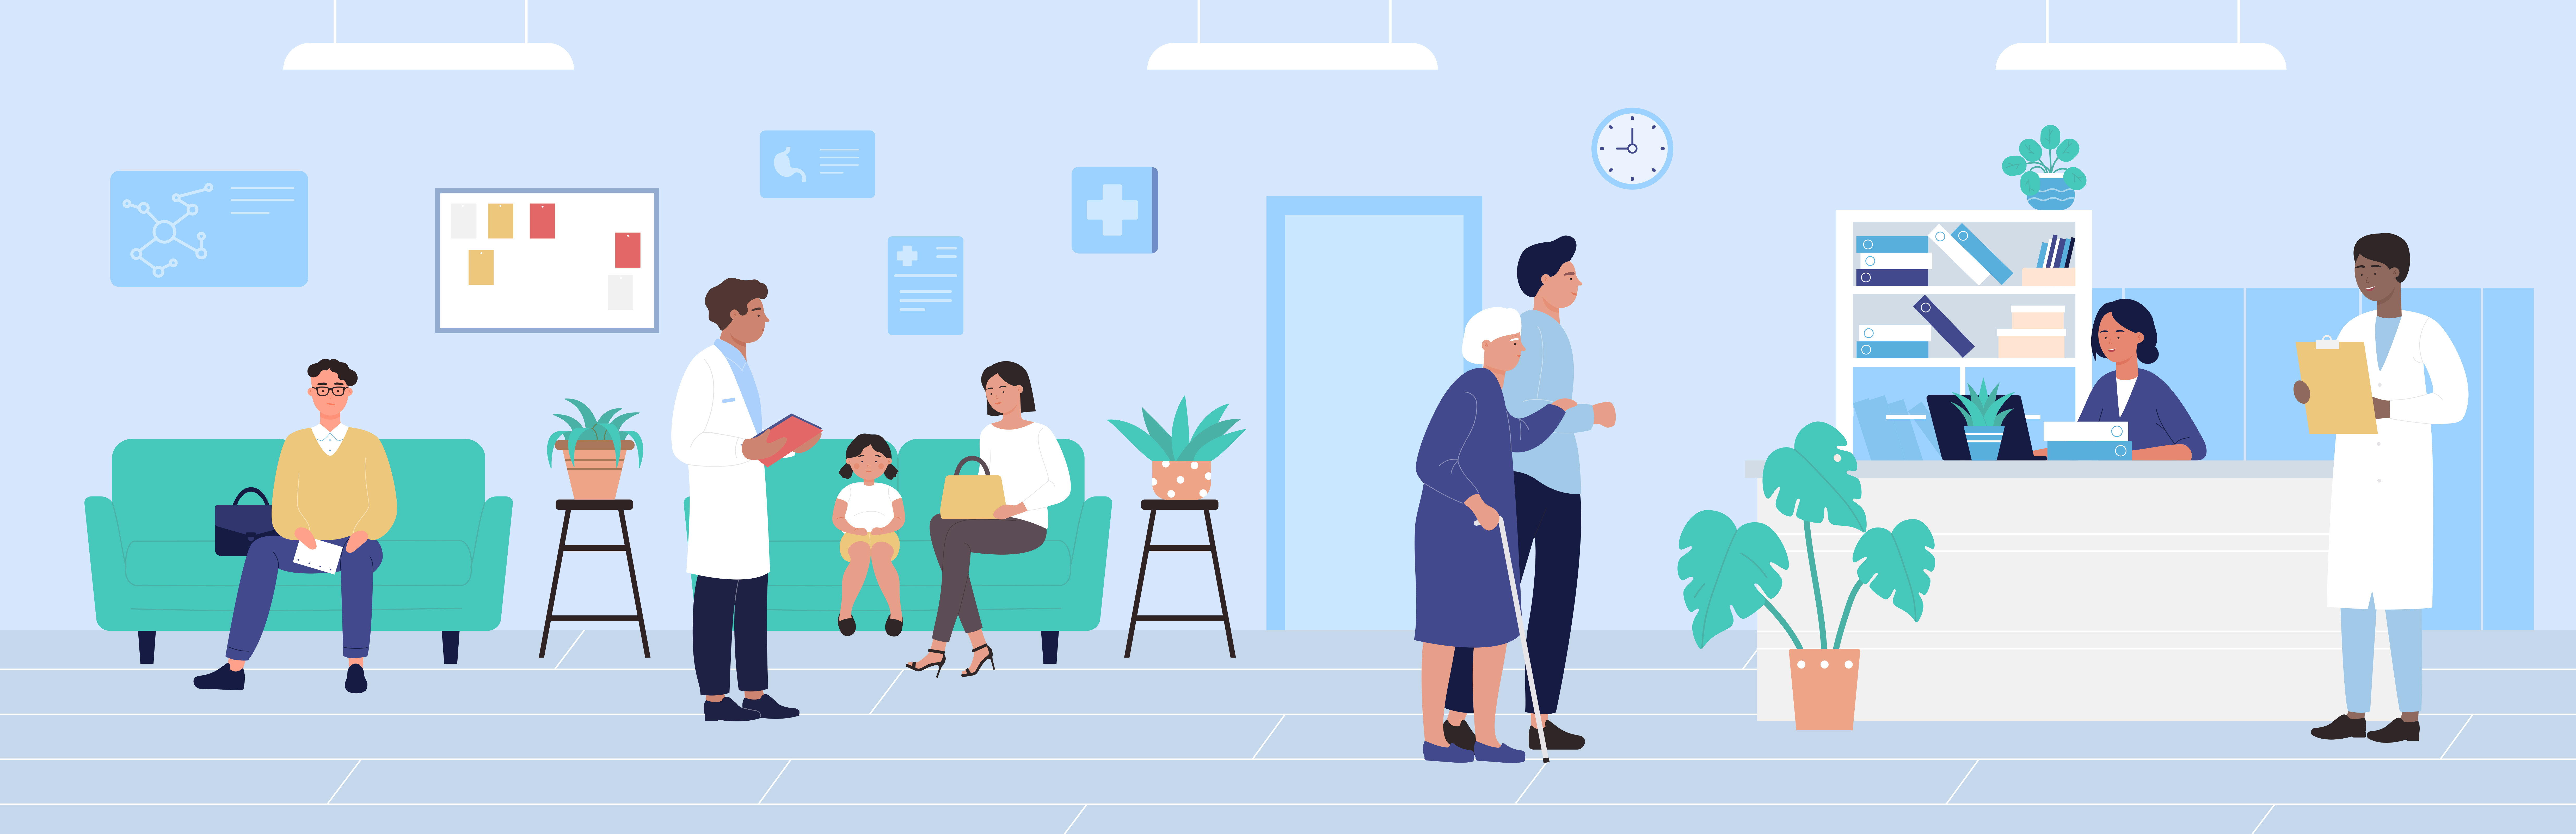 Hospital,Reception,Illustration.,Cartoon,Flat,Patient,Characters,Waiting,Doctors,Appointment,